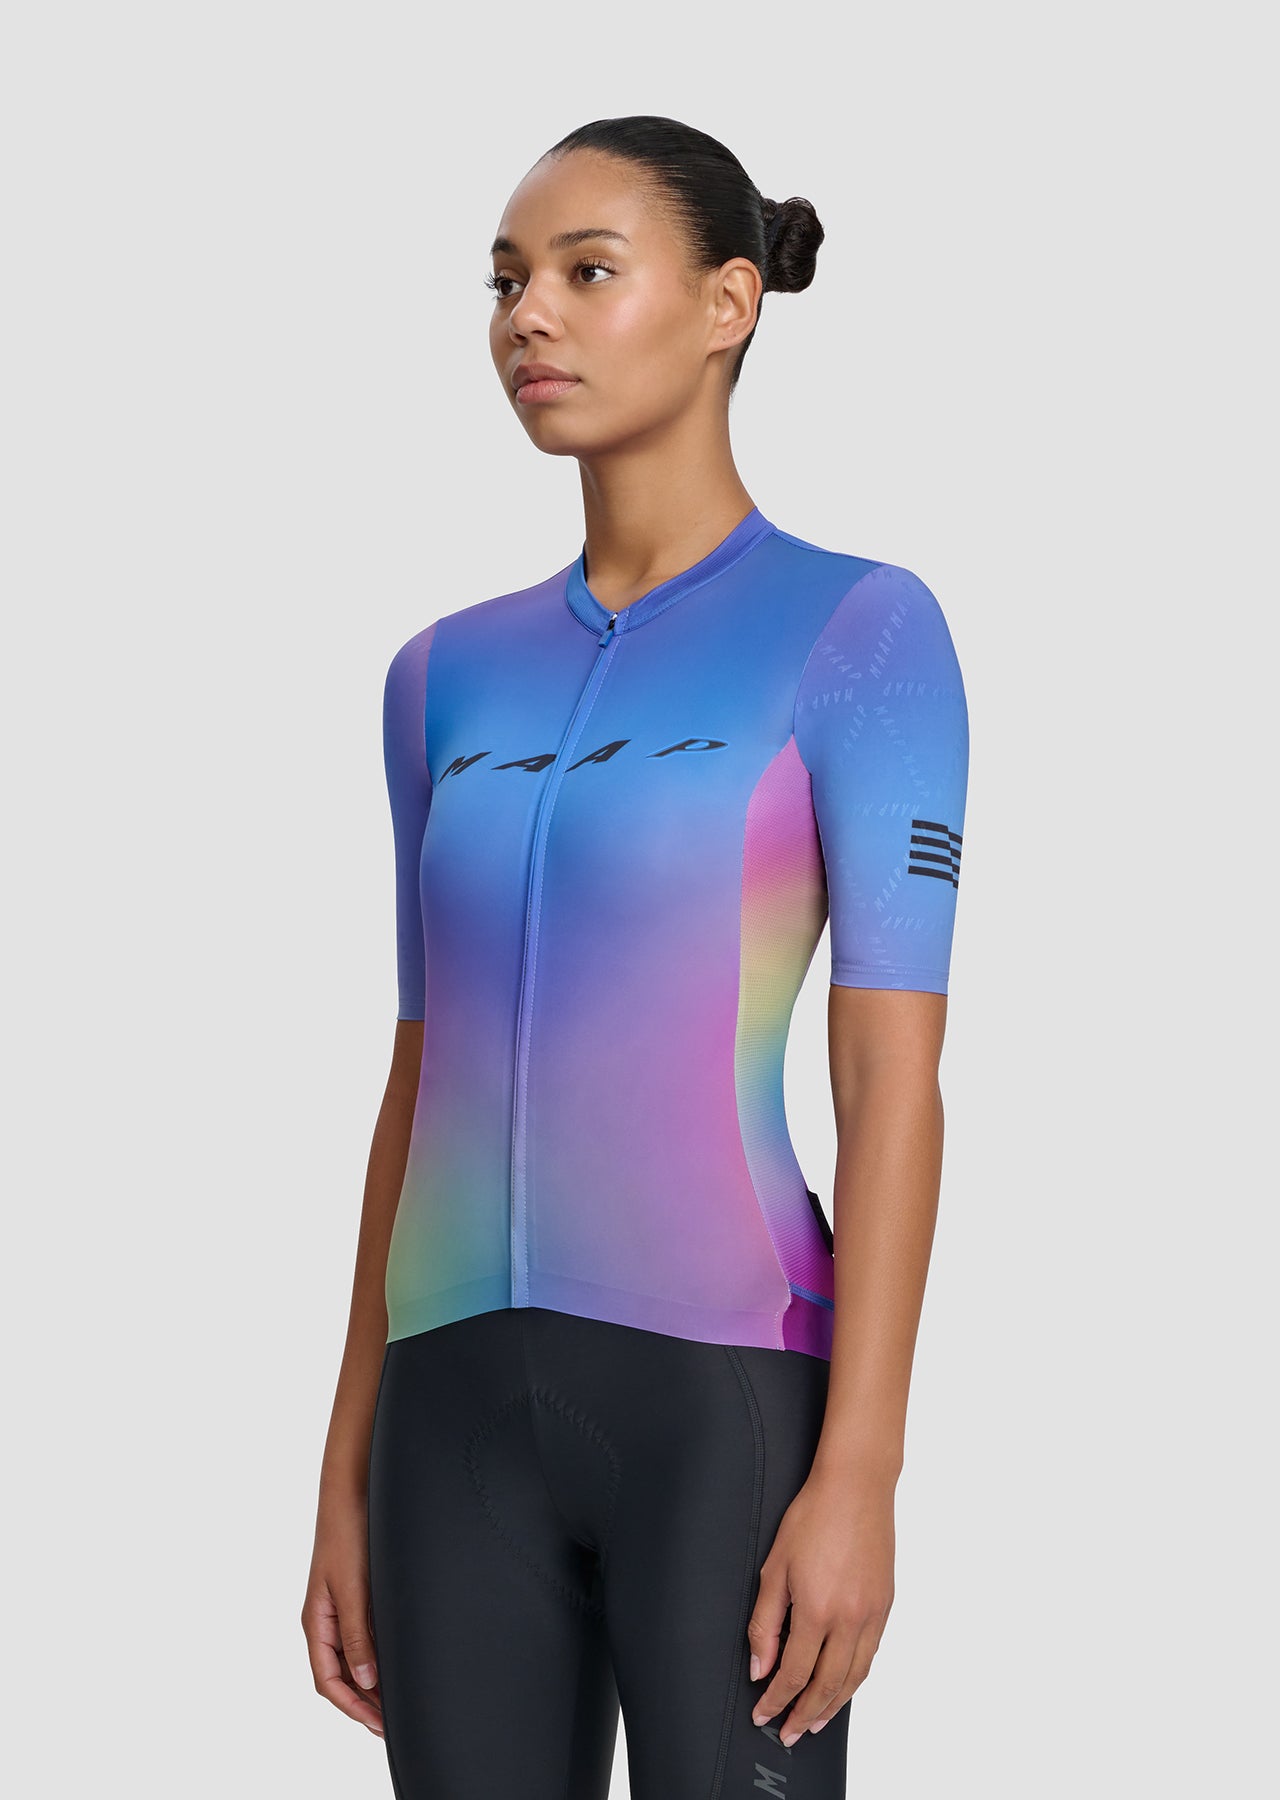 Women's Blurred Out Pro Hex Jersey 2.0 - MAAP Cycling Apparel